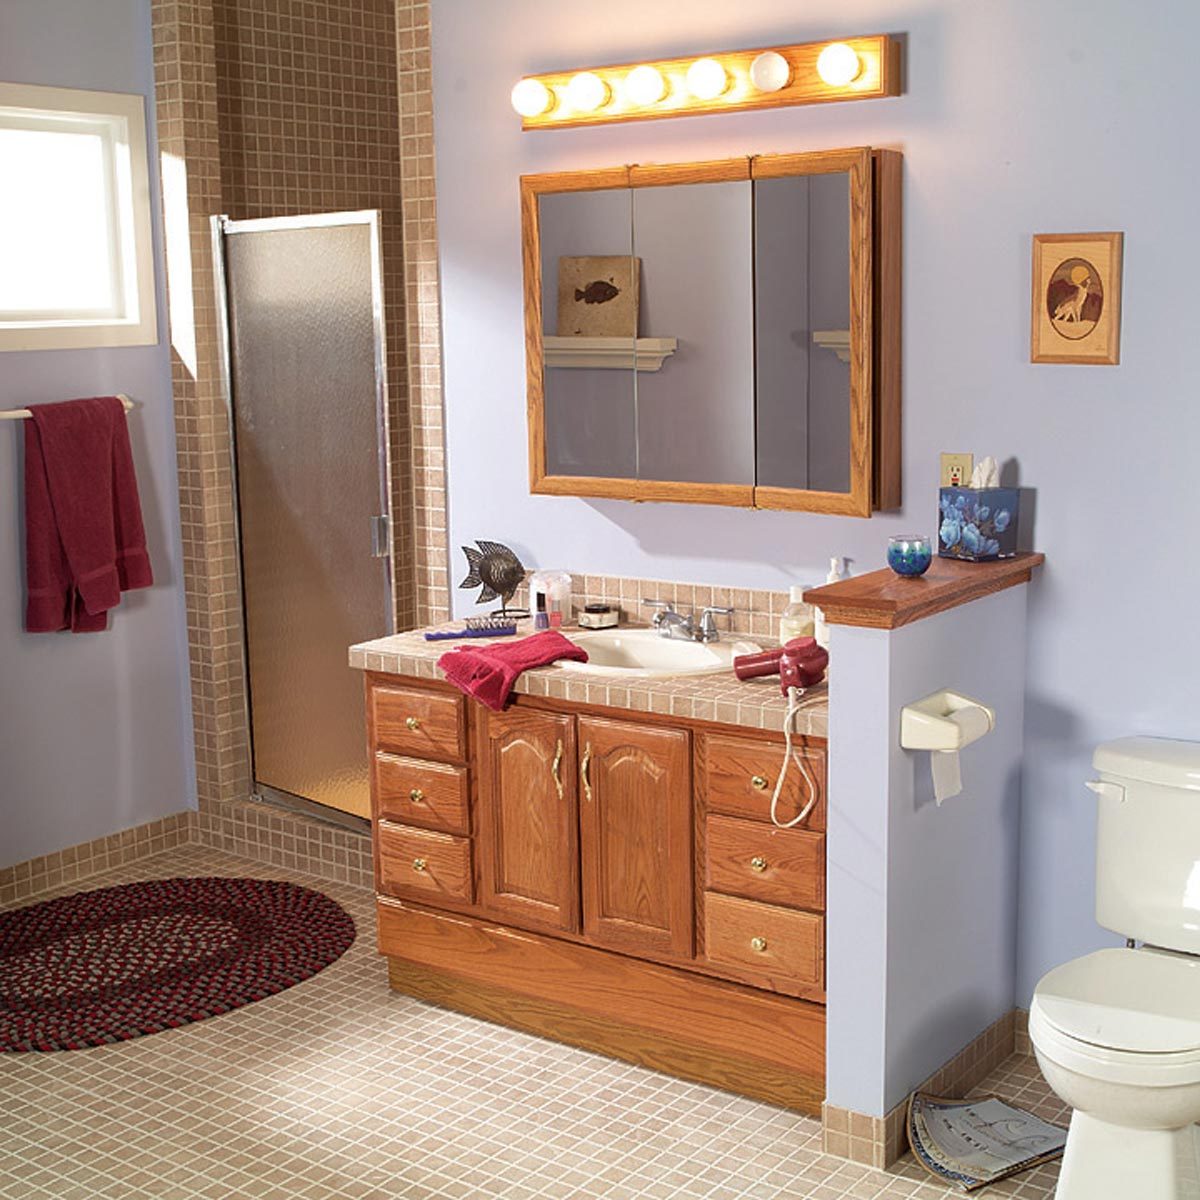 7 Before And After Bathroom Makeovers You Can Do In A Weekend